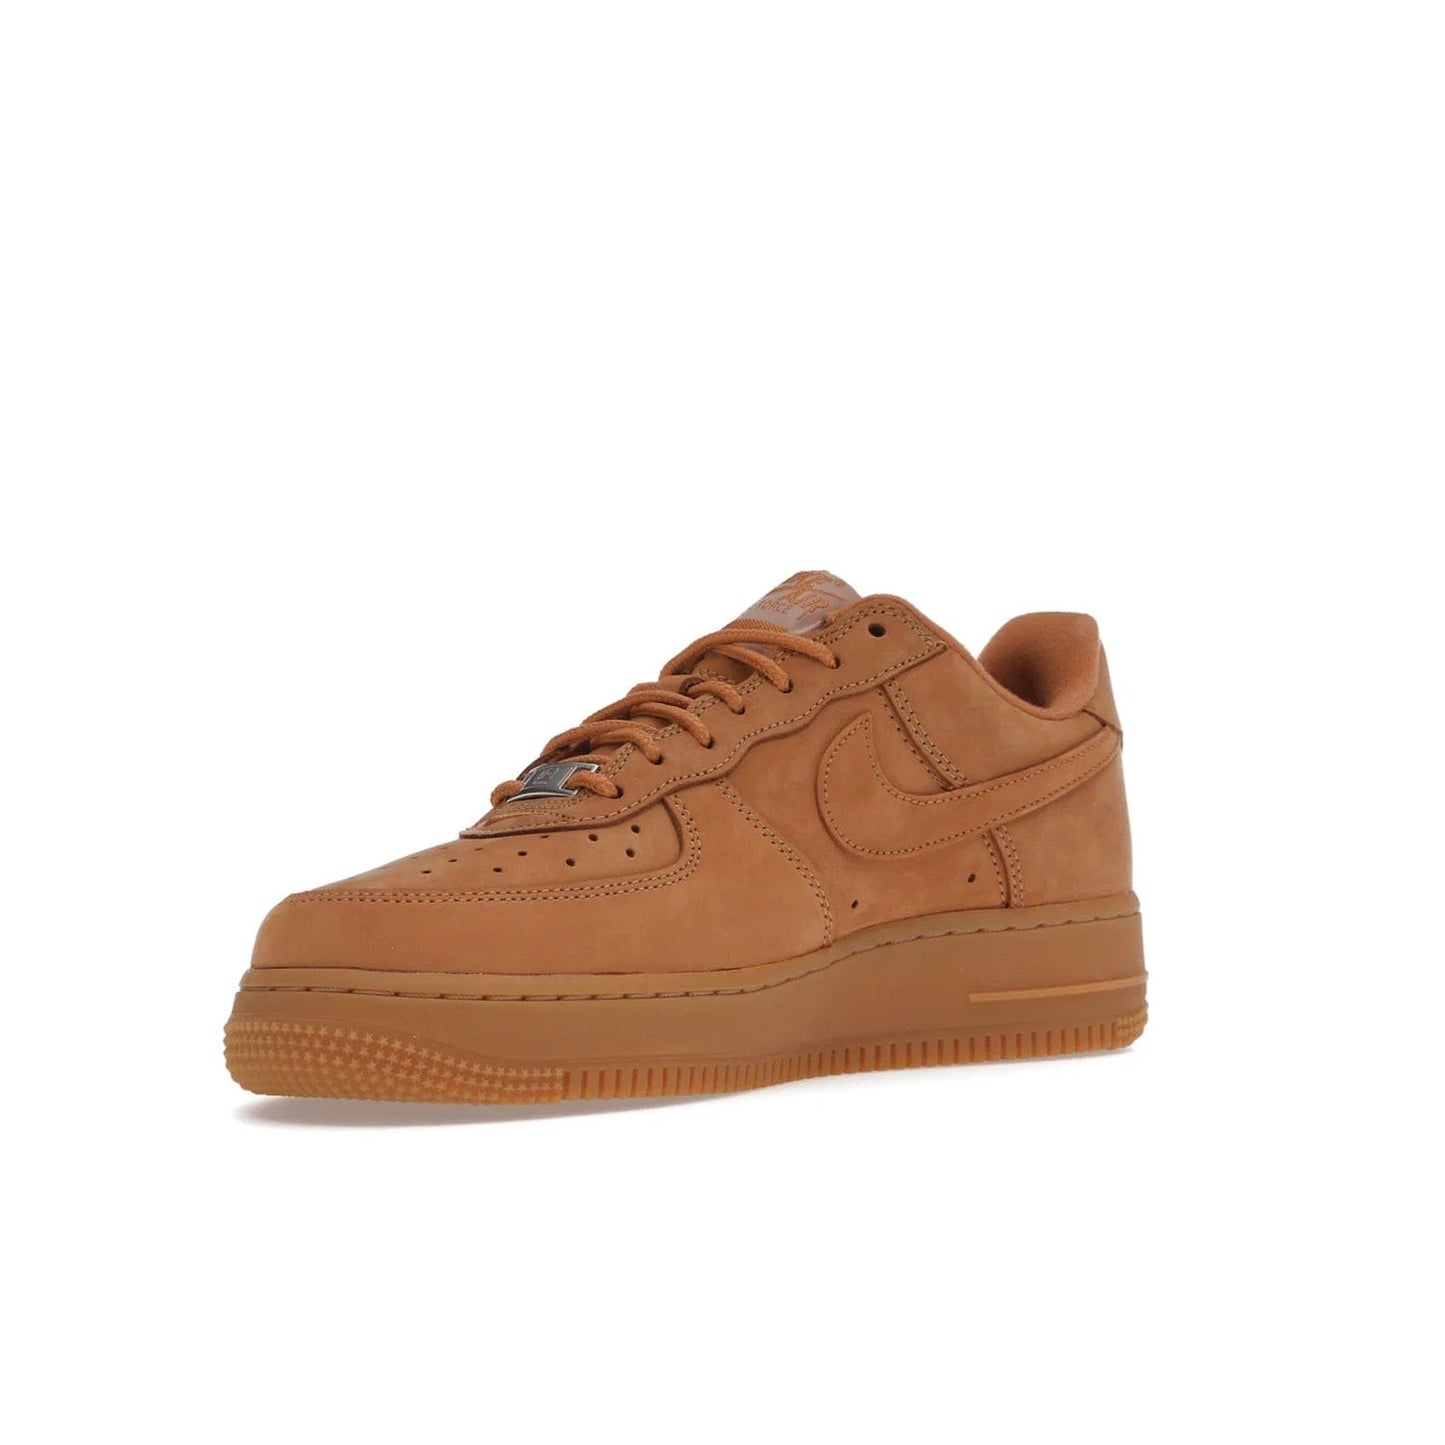 Nike Air Force 1 Low SP Supreme Wheat - Image 15 - Only at www.BallersClubKickz.com - A luxe Flax Durabuck upper and Supreme Box Logo insignias on the lateral heels make the Nike Air Force 1 Low SP Supreme Wheat a stylish lifestyle shoe. Matching Flax Air sole adds a classic touch to this collaboration between Nike and Supreme. Make a statement with this edition of the classic Air Force 1 Low.